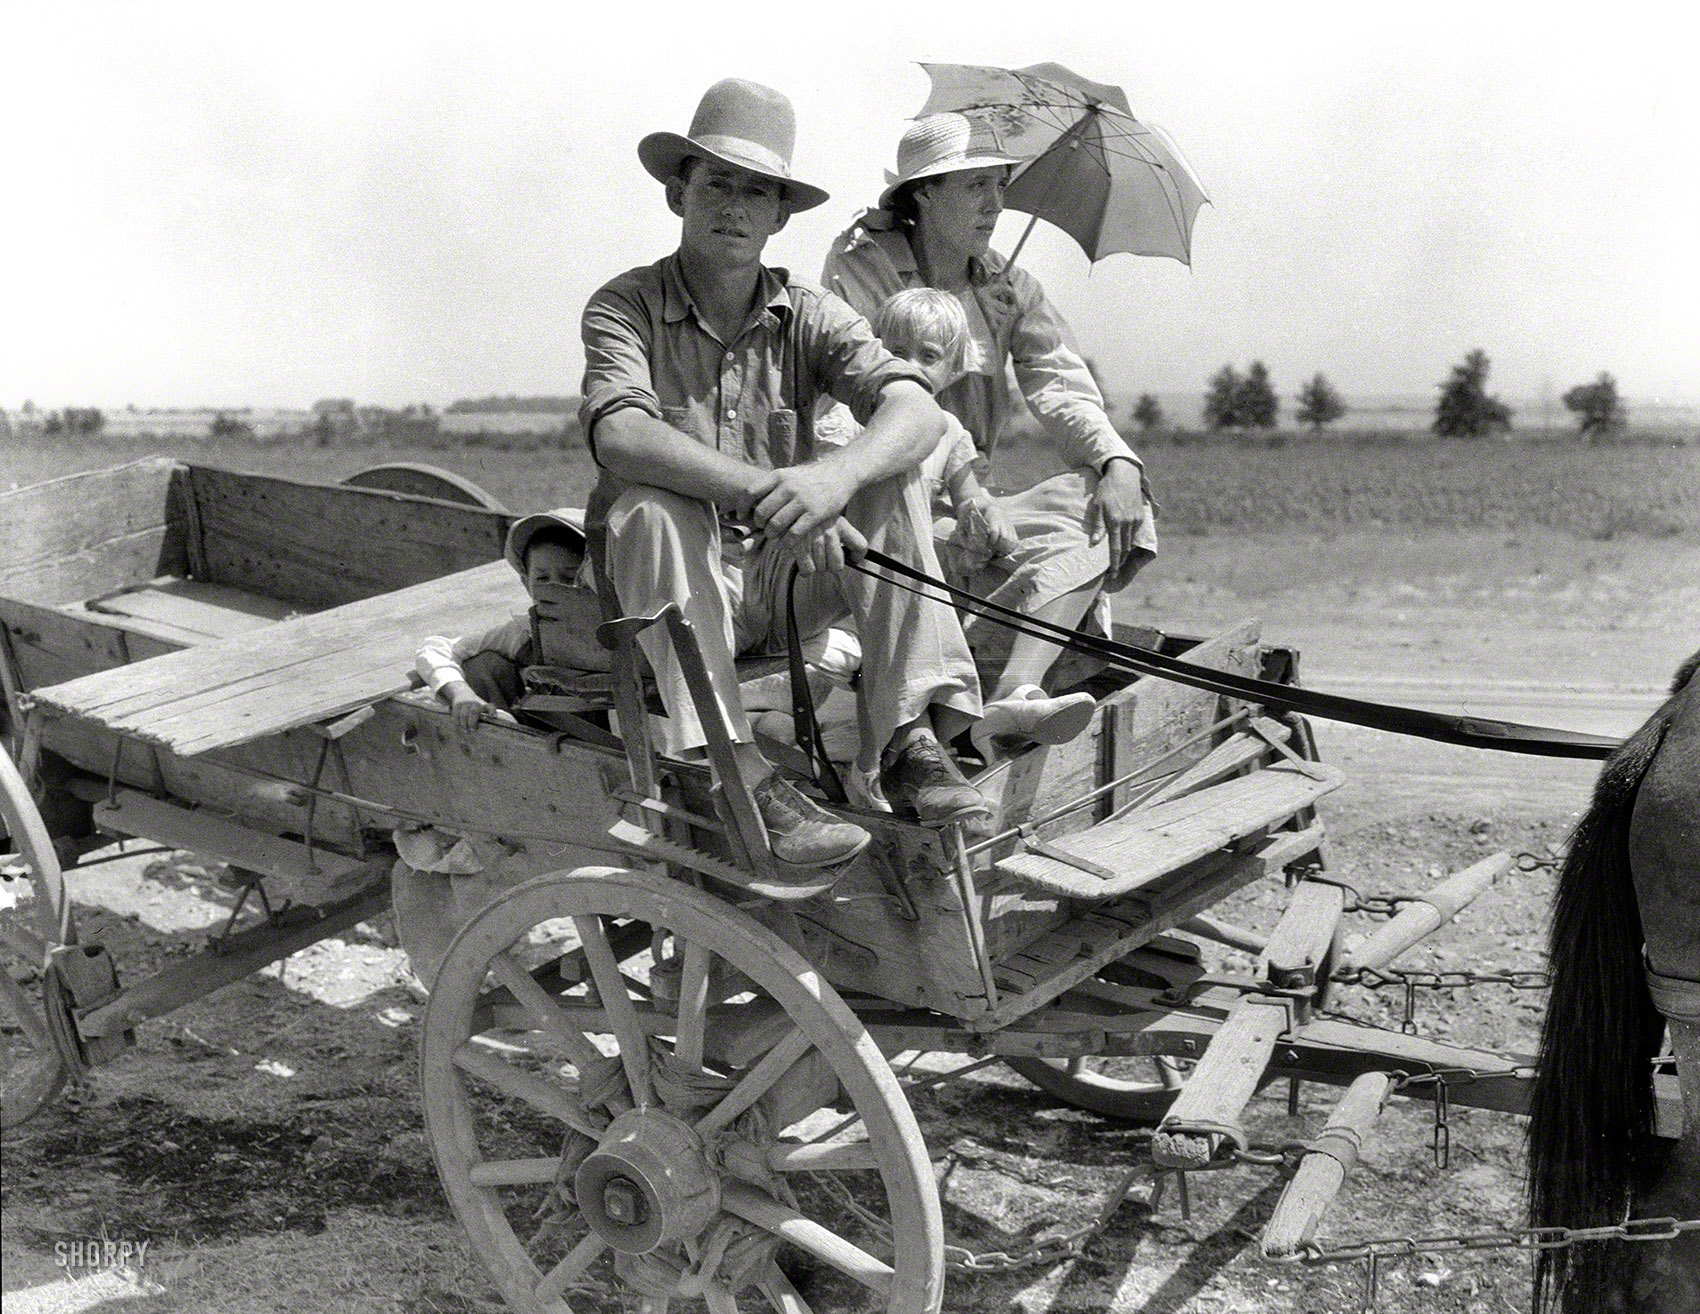 August 1939. "Drought-stricken farmer and family near Muskogee, Oklahoma. Agricultural day laborer." Wanted: Escalade with tinted glass. Large format negative by Dorothea Lange, Resettlement Administration. View full size.